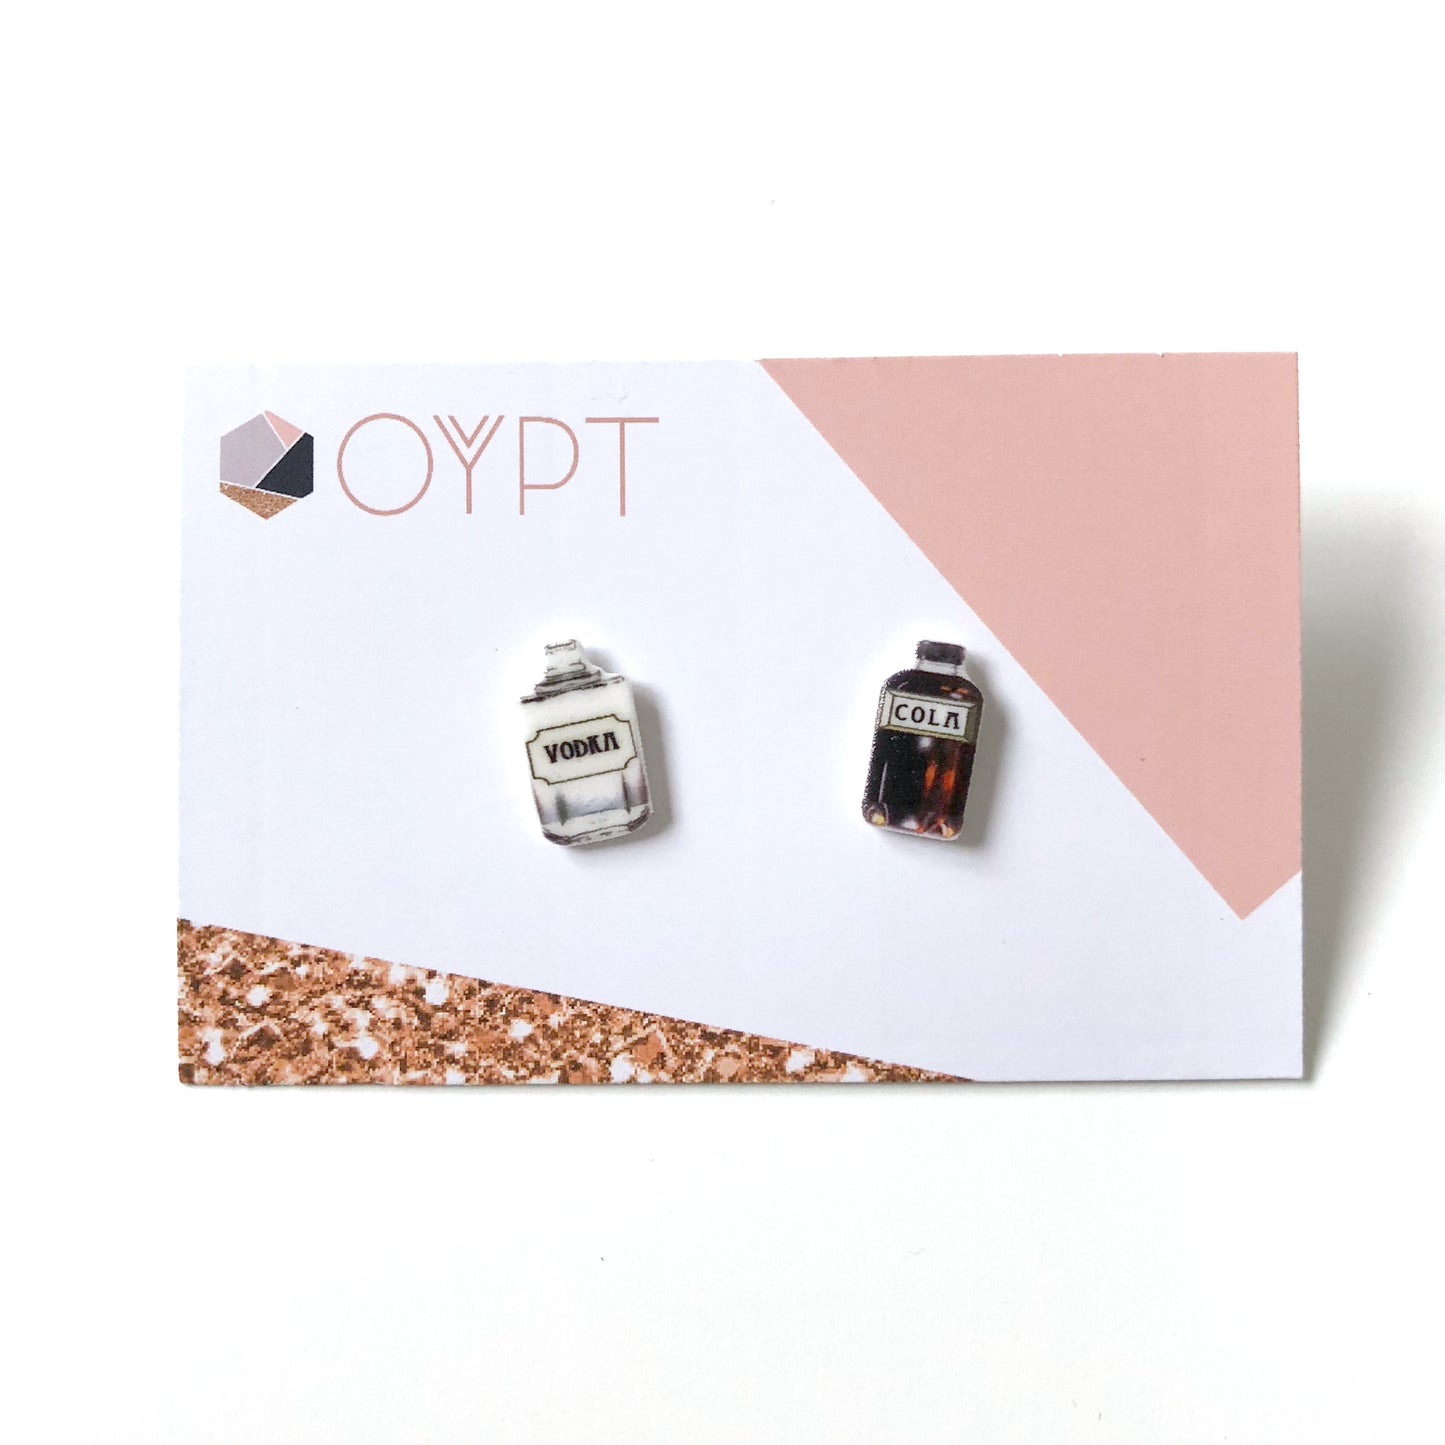 Vodka and cola bottle stud earrings - Quirky gift for friends